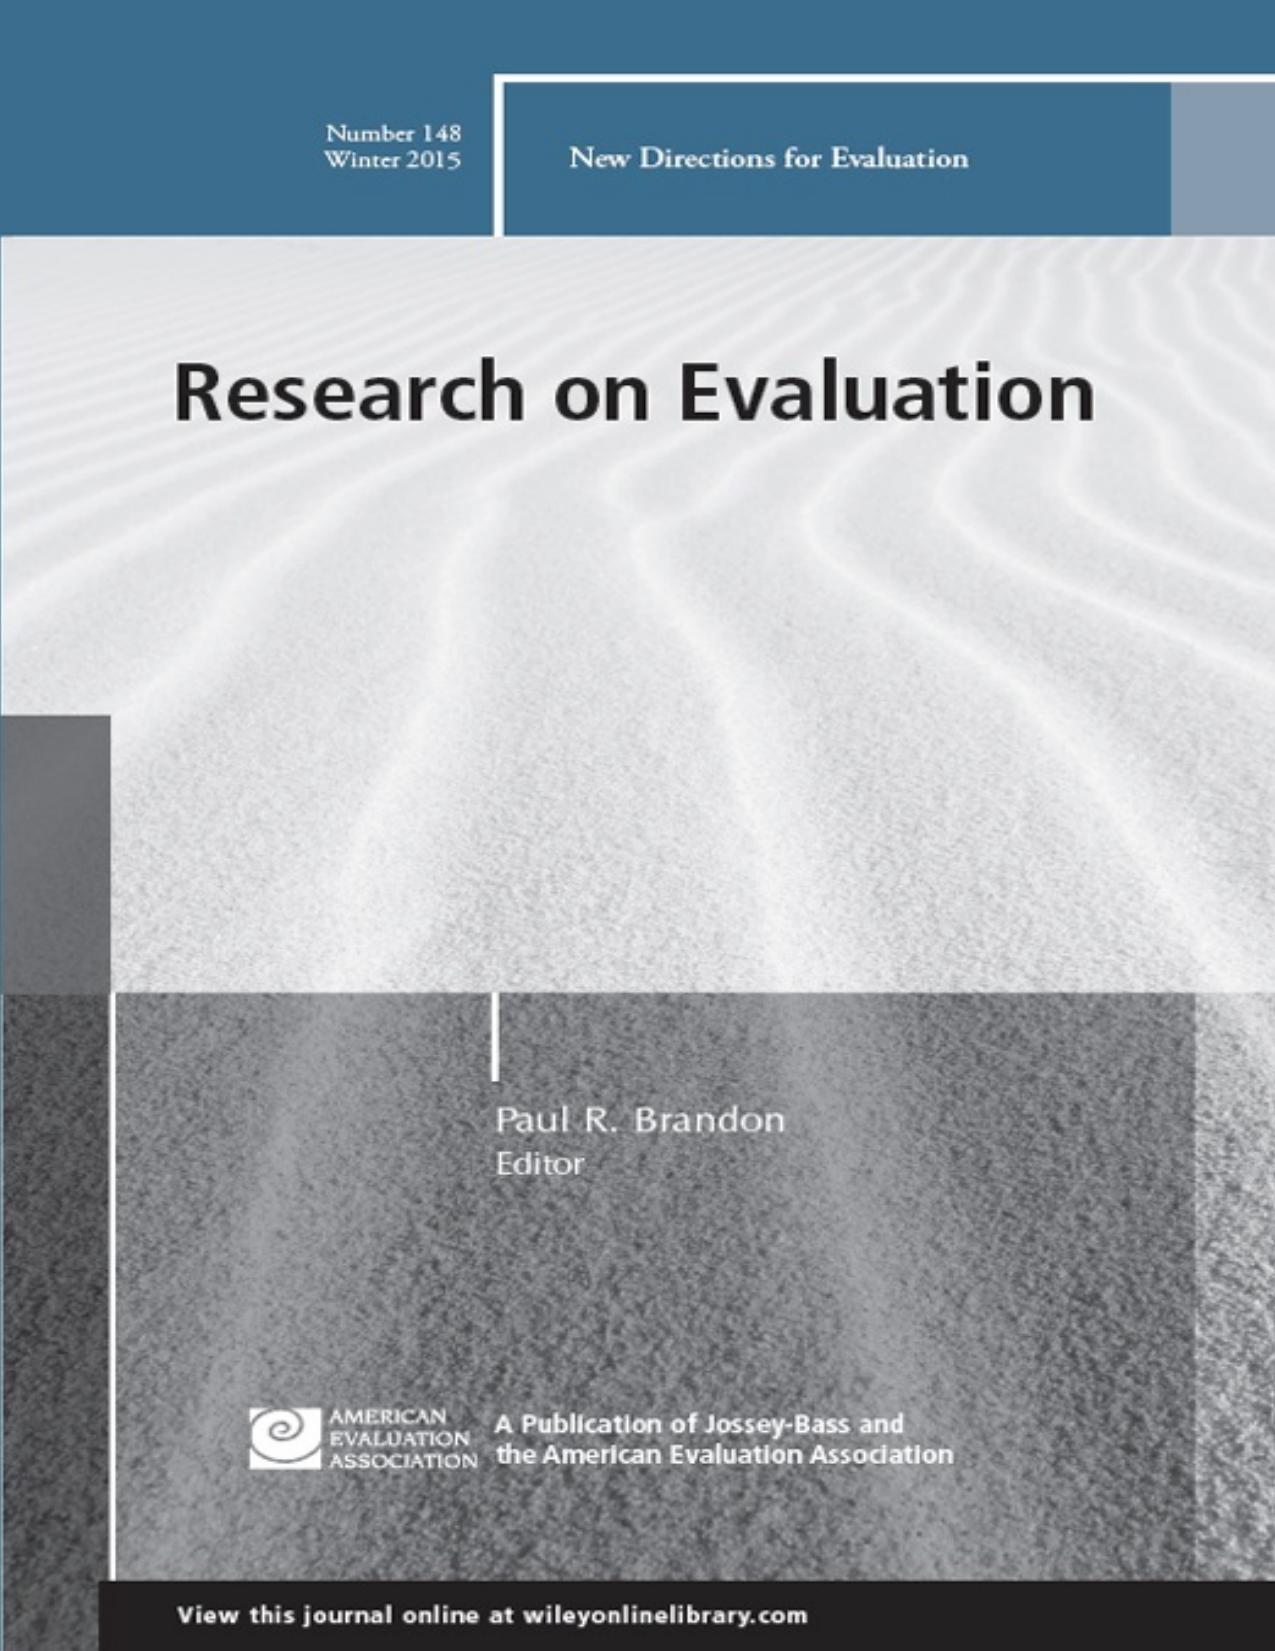 Research on Evaluation : New Directions for Evaluation, Number 148 by Paul R. Brandon